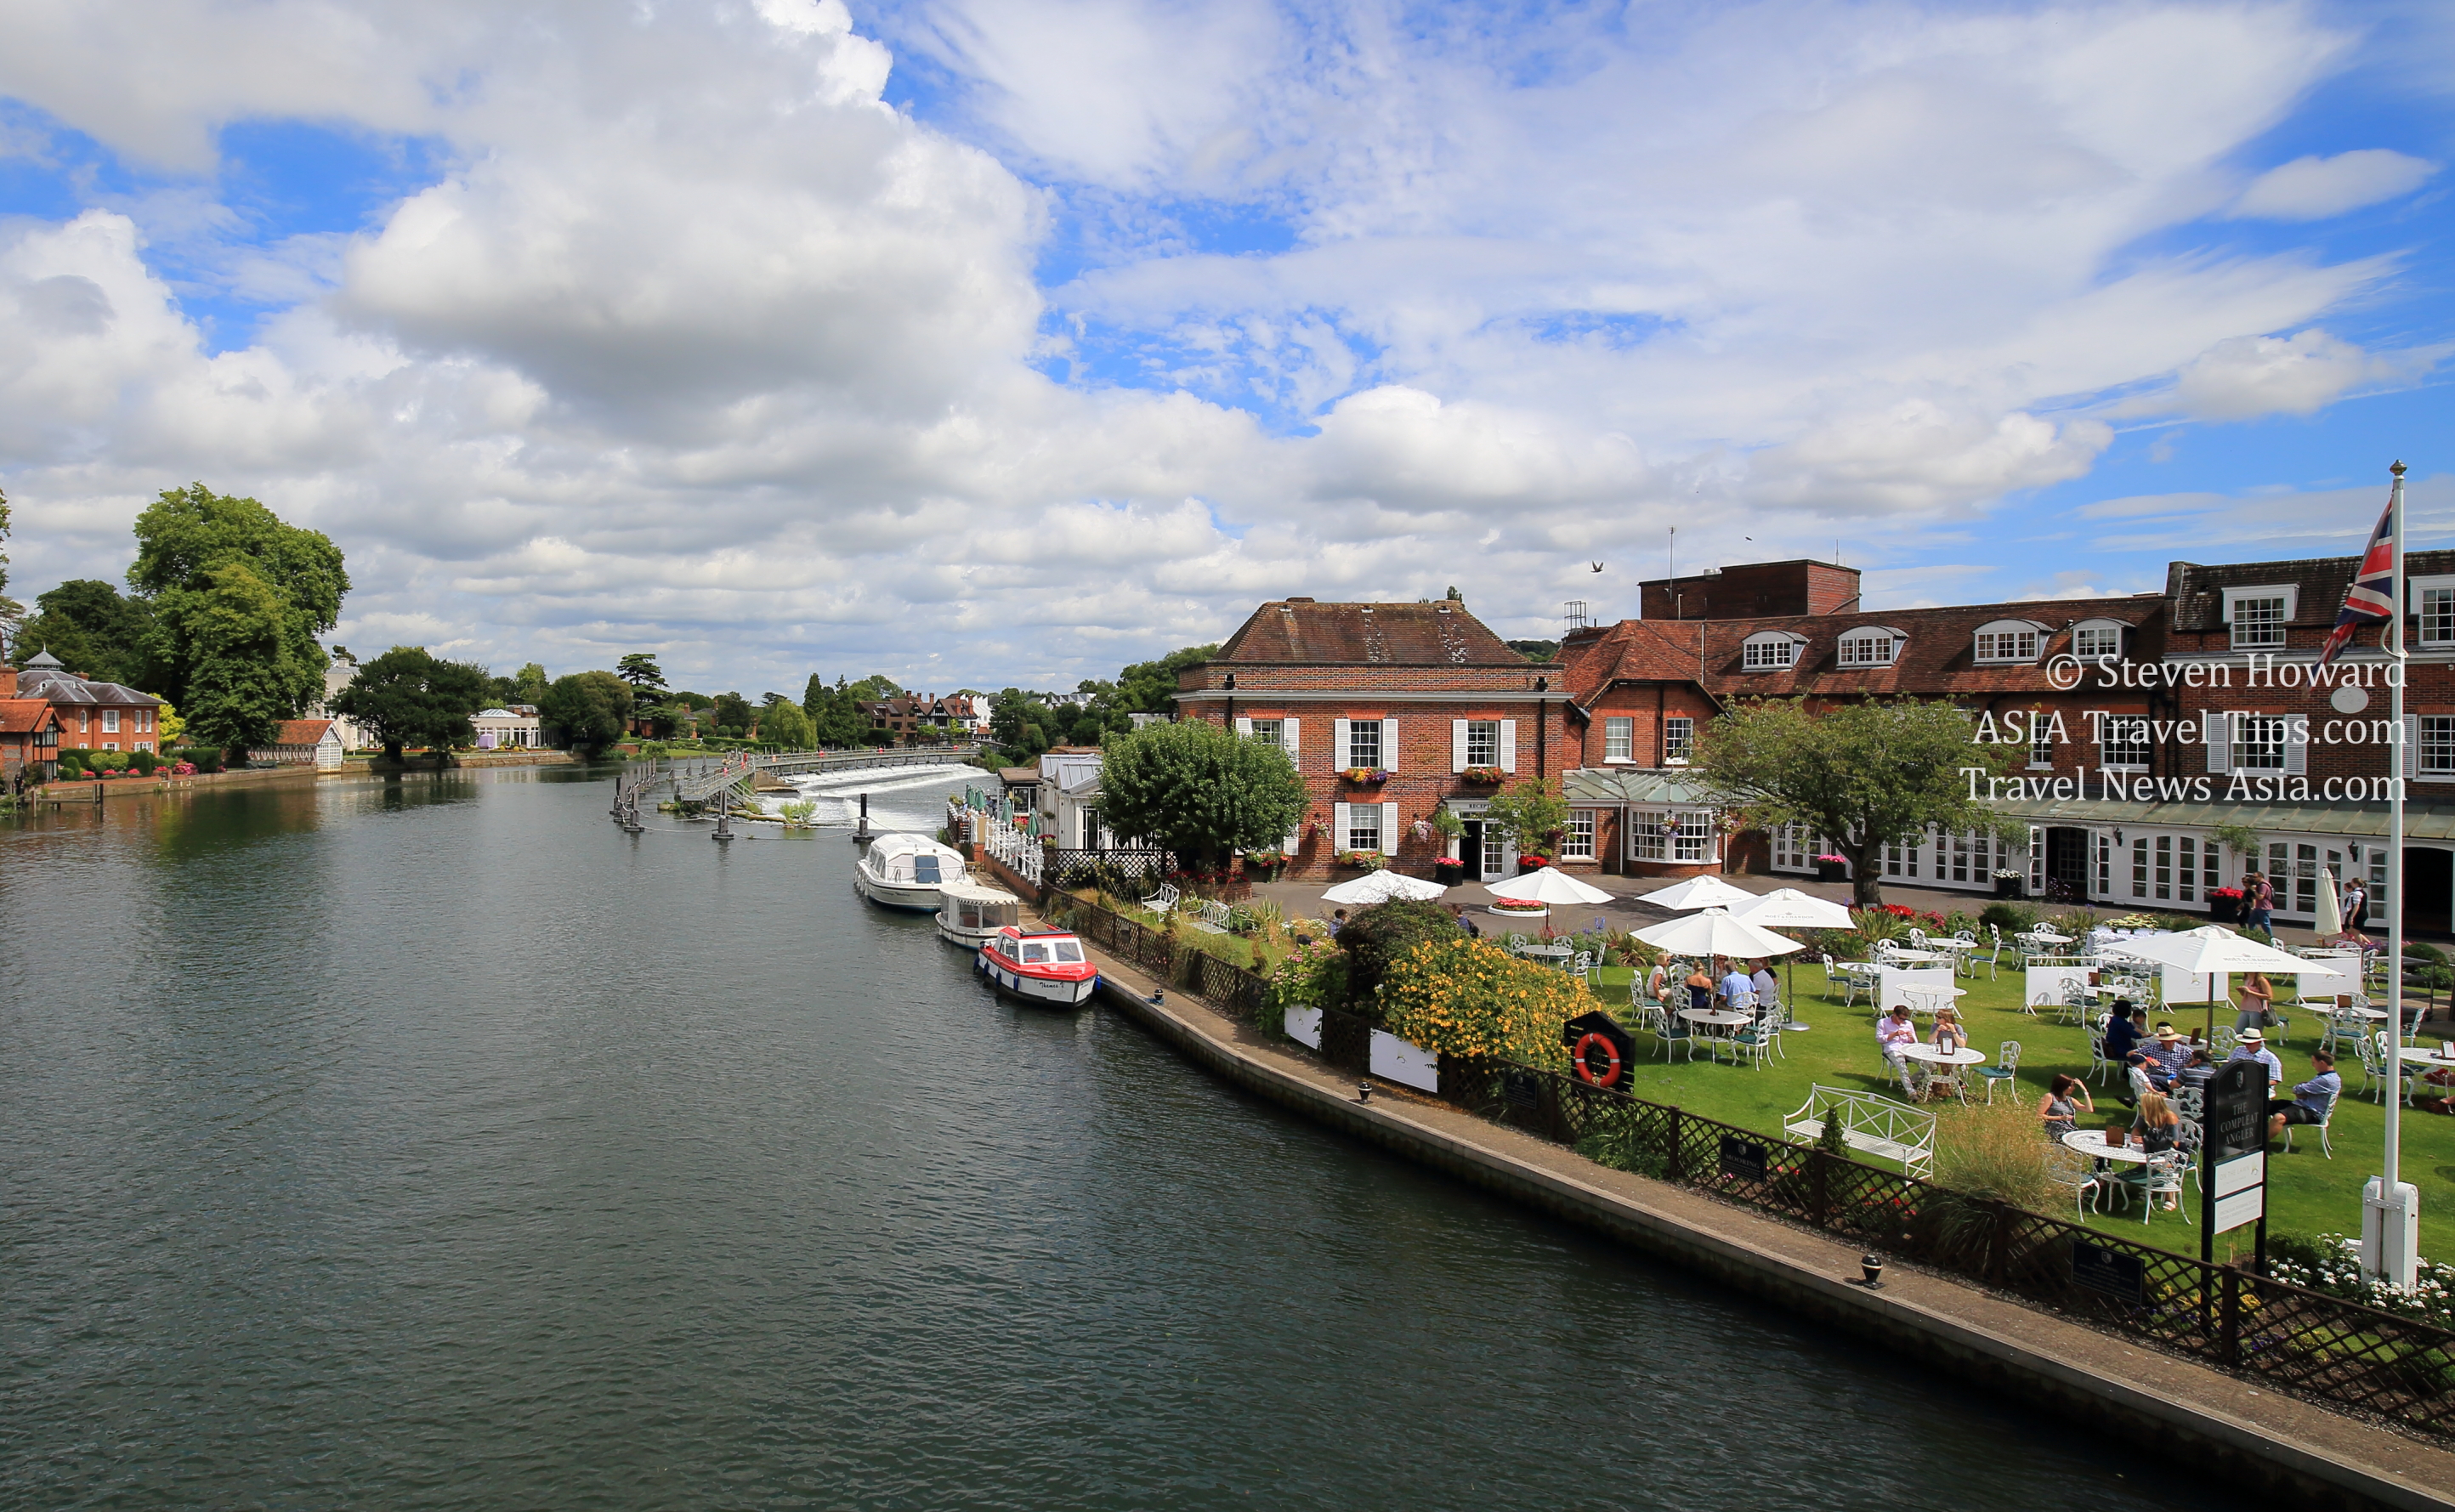 Marlow, England in 2016. Picture by Steven Howard of TravelNewsAsia.com Click to enlarge.